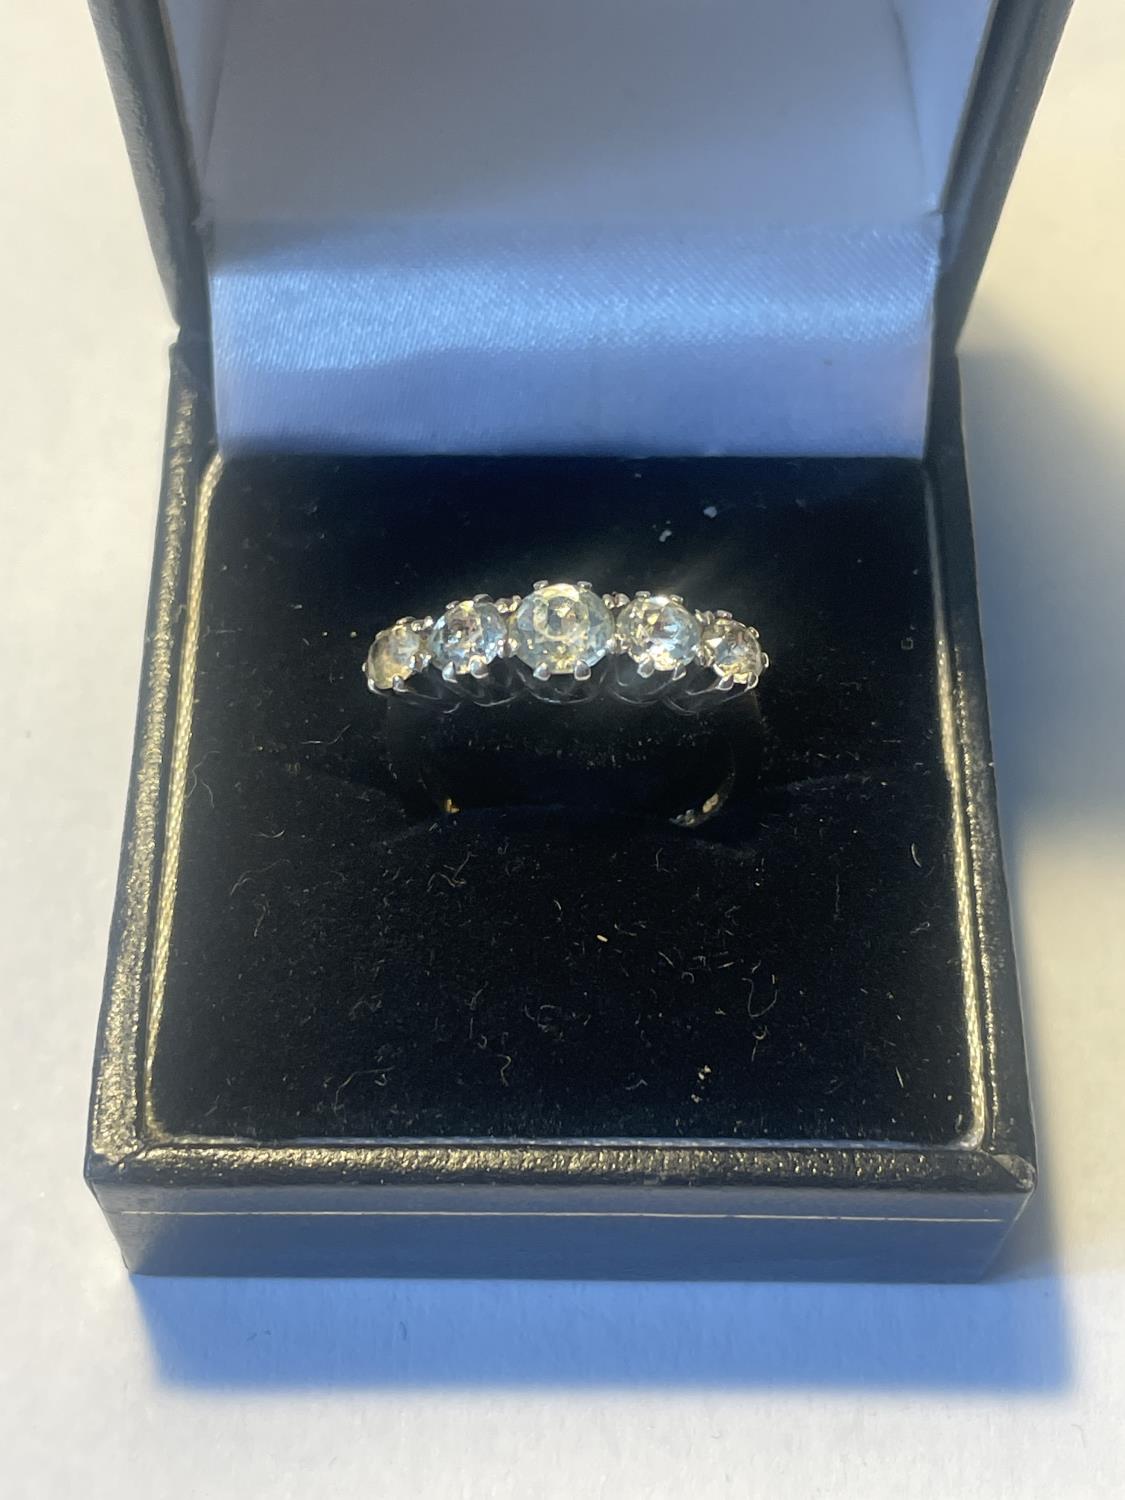 A SILVER AND 9 CARAT GOLD RING WITH FOVE IN LINE CLEAR STONES IN A PRESENTATION BOX